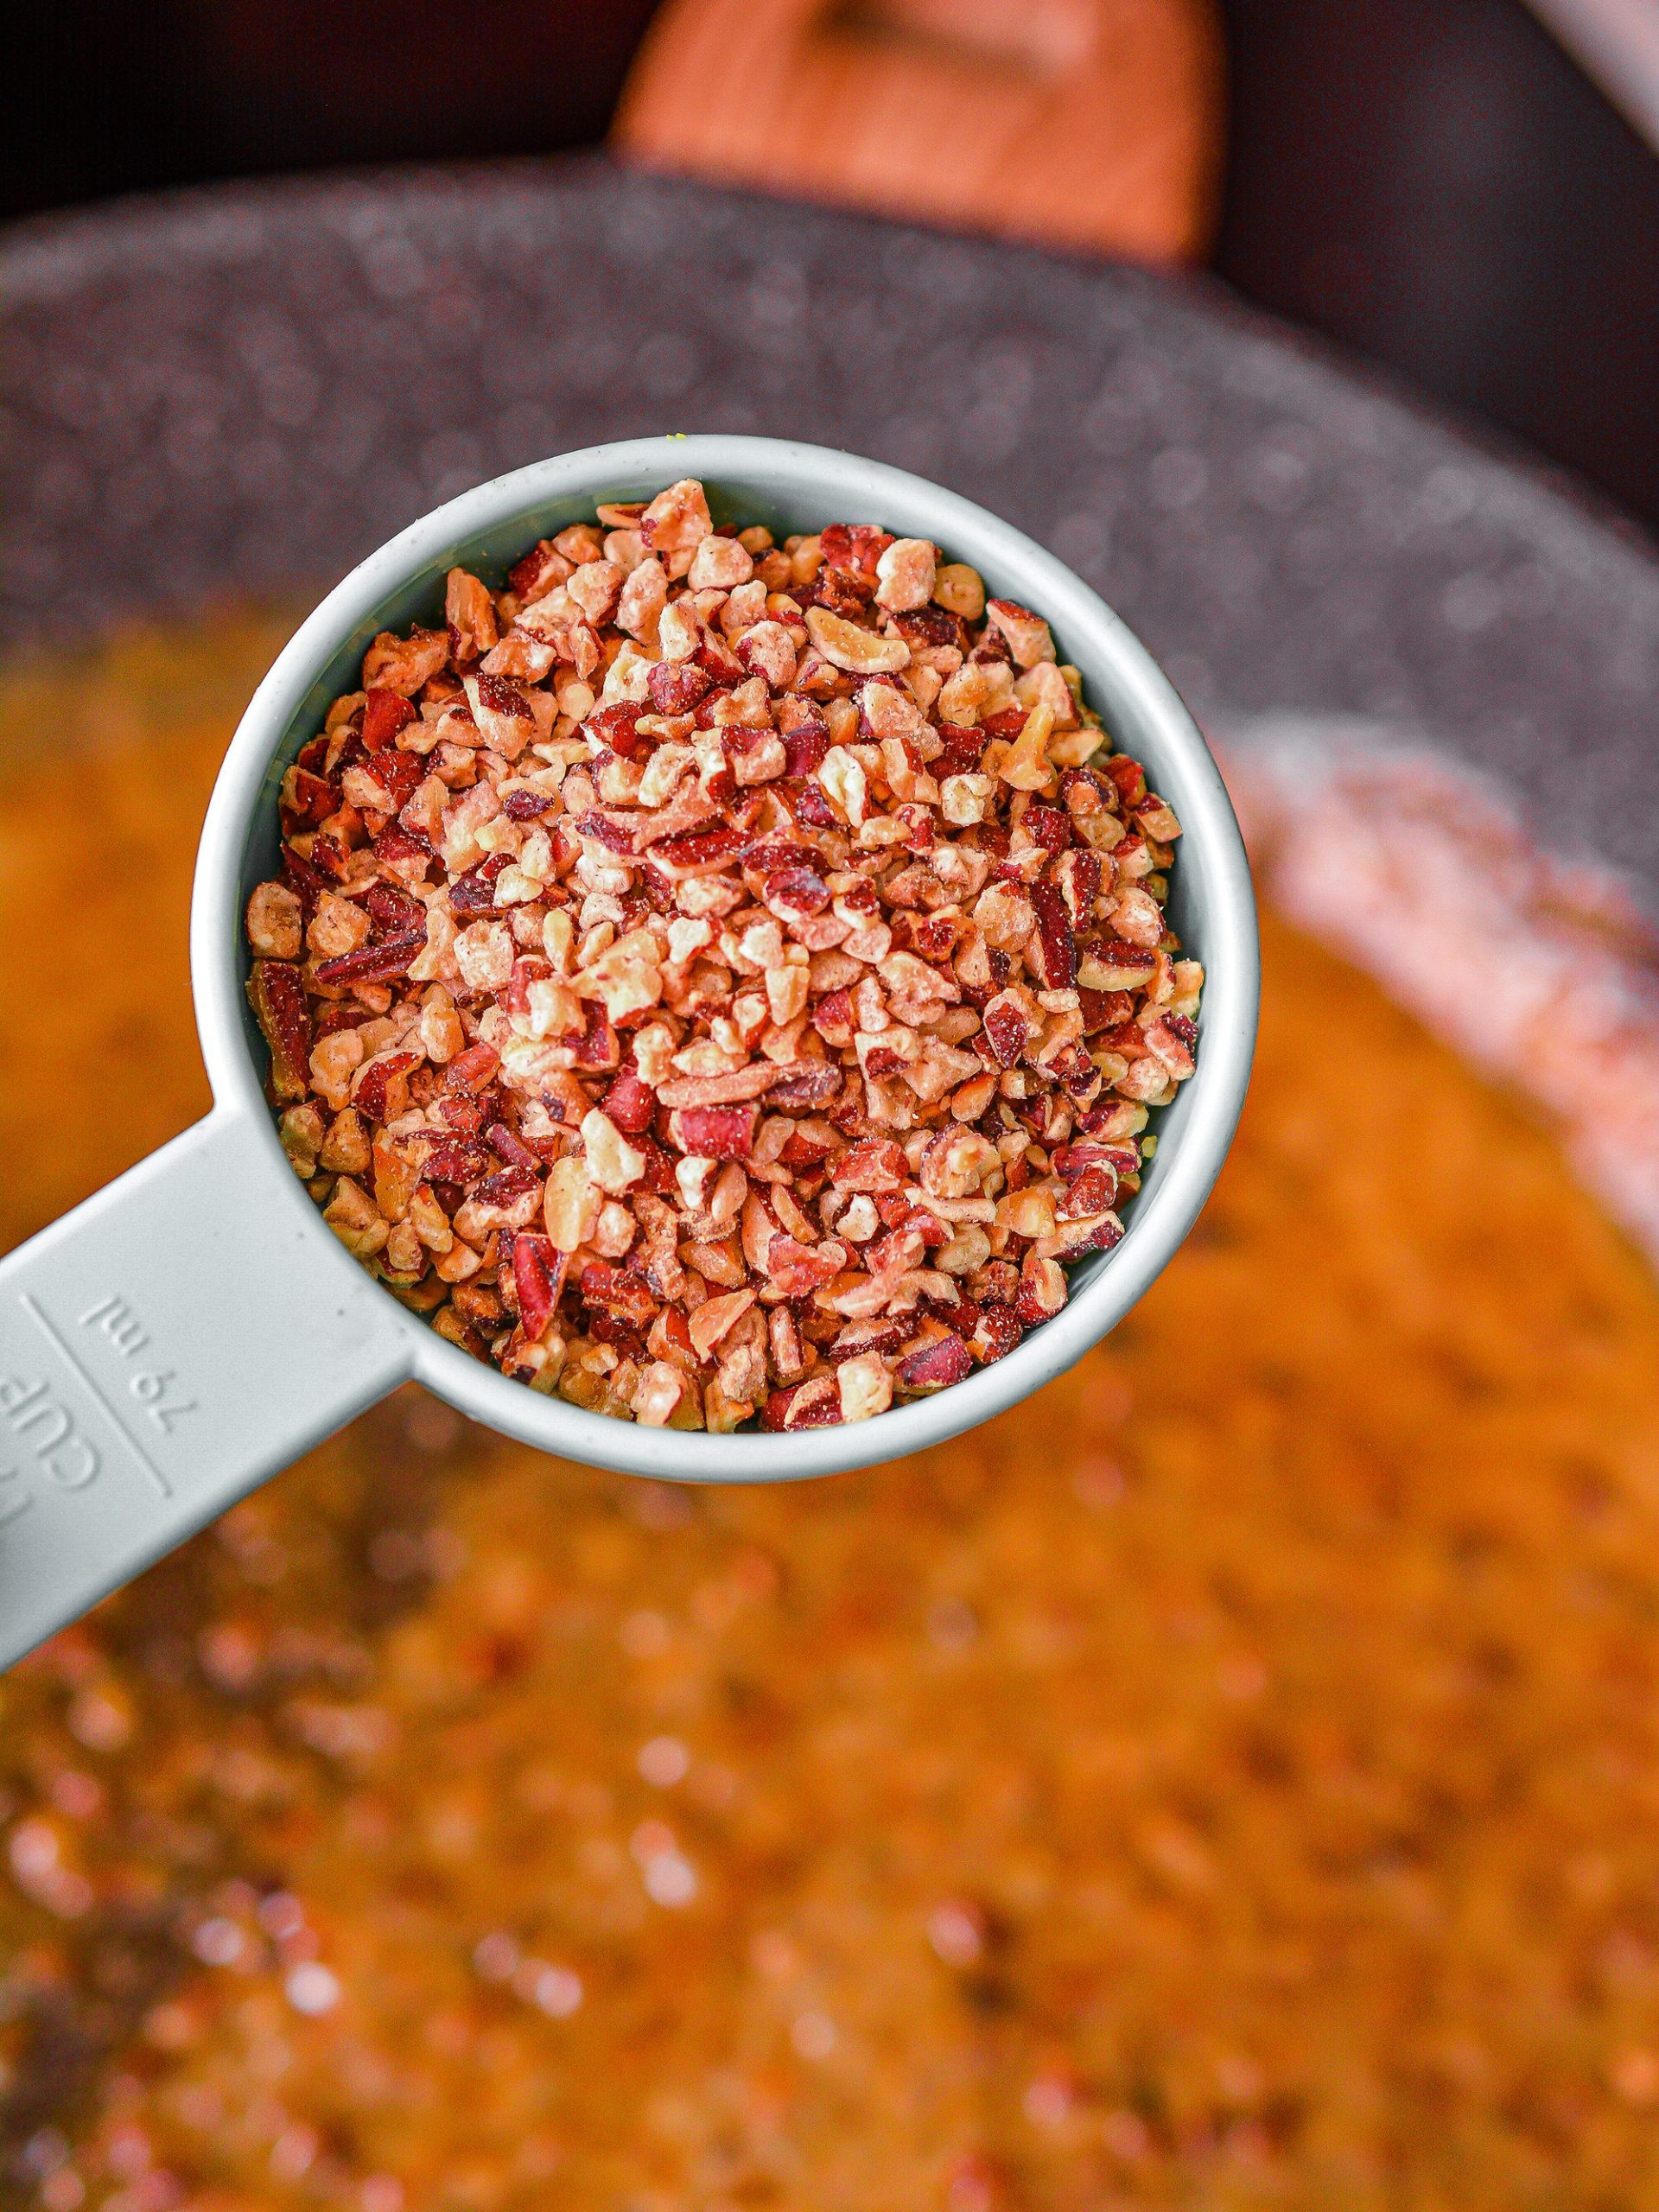 Stir in the last ⅓ cup of the pecans.